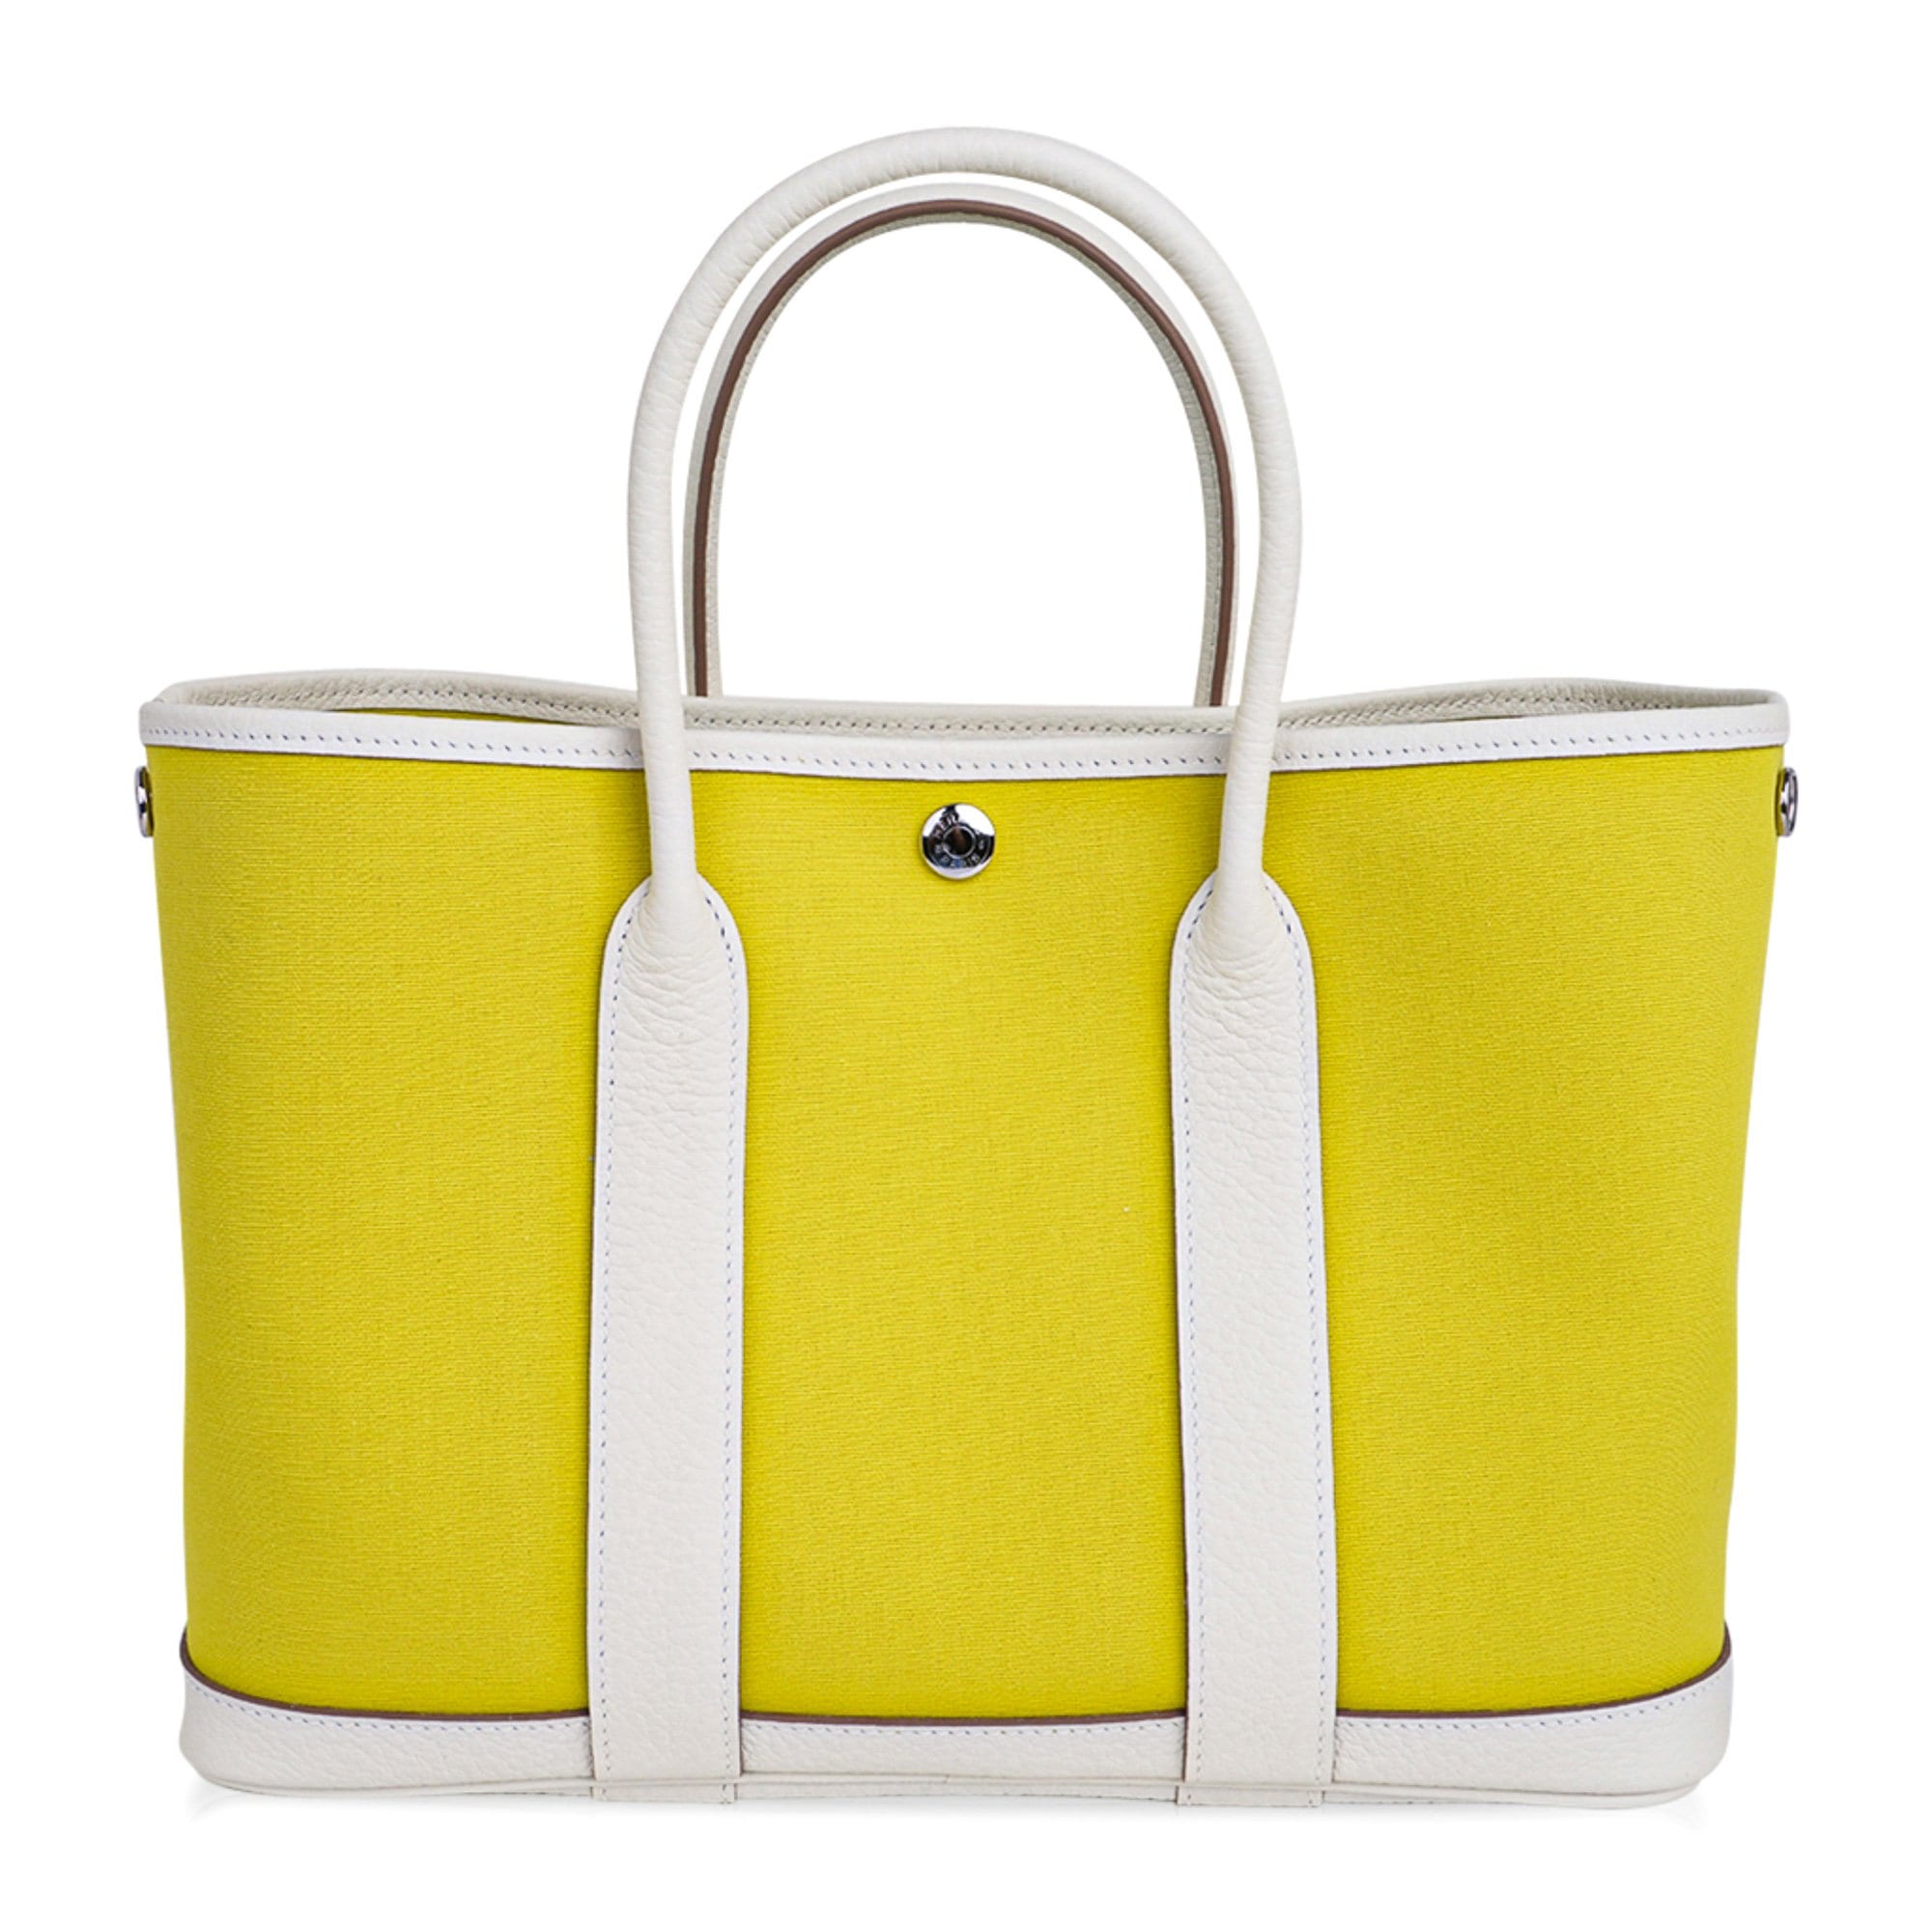 Hermes Bag Garden Party 30 Bag Lime Toile Officier / Blanc Vache Count –  Mightychic